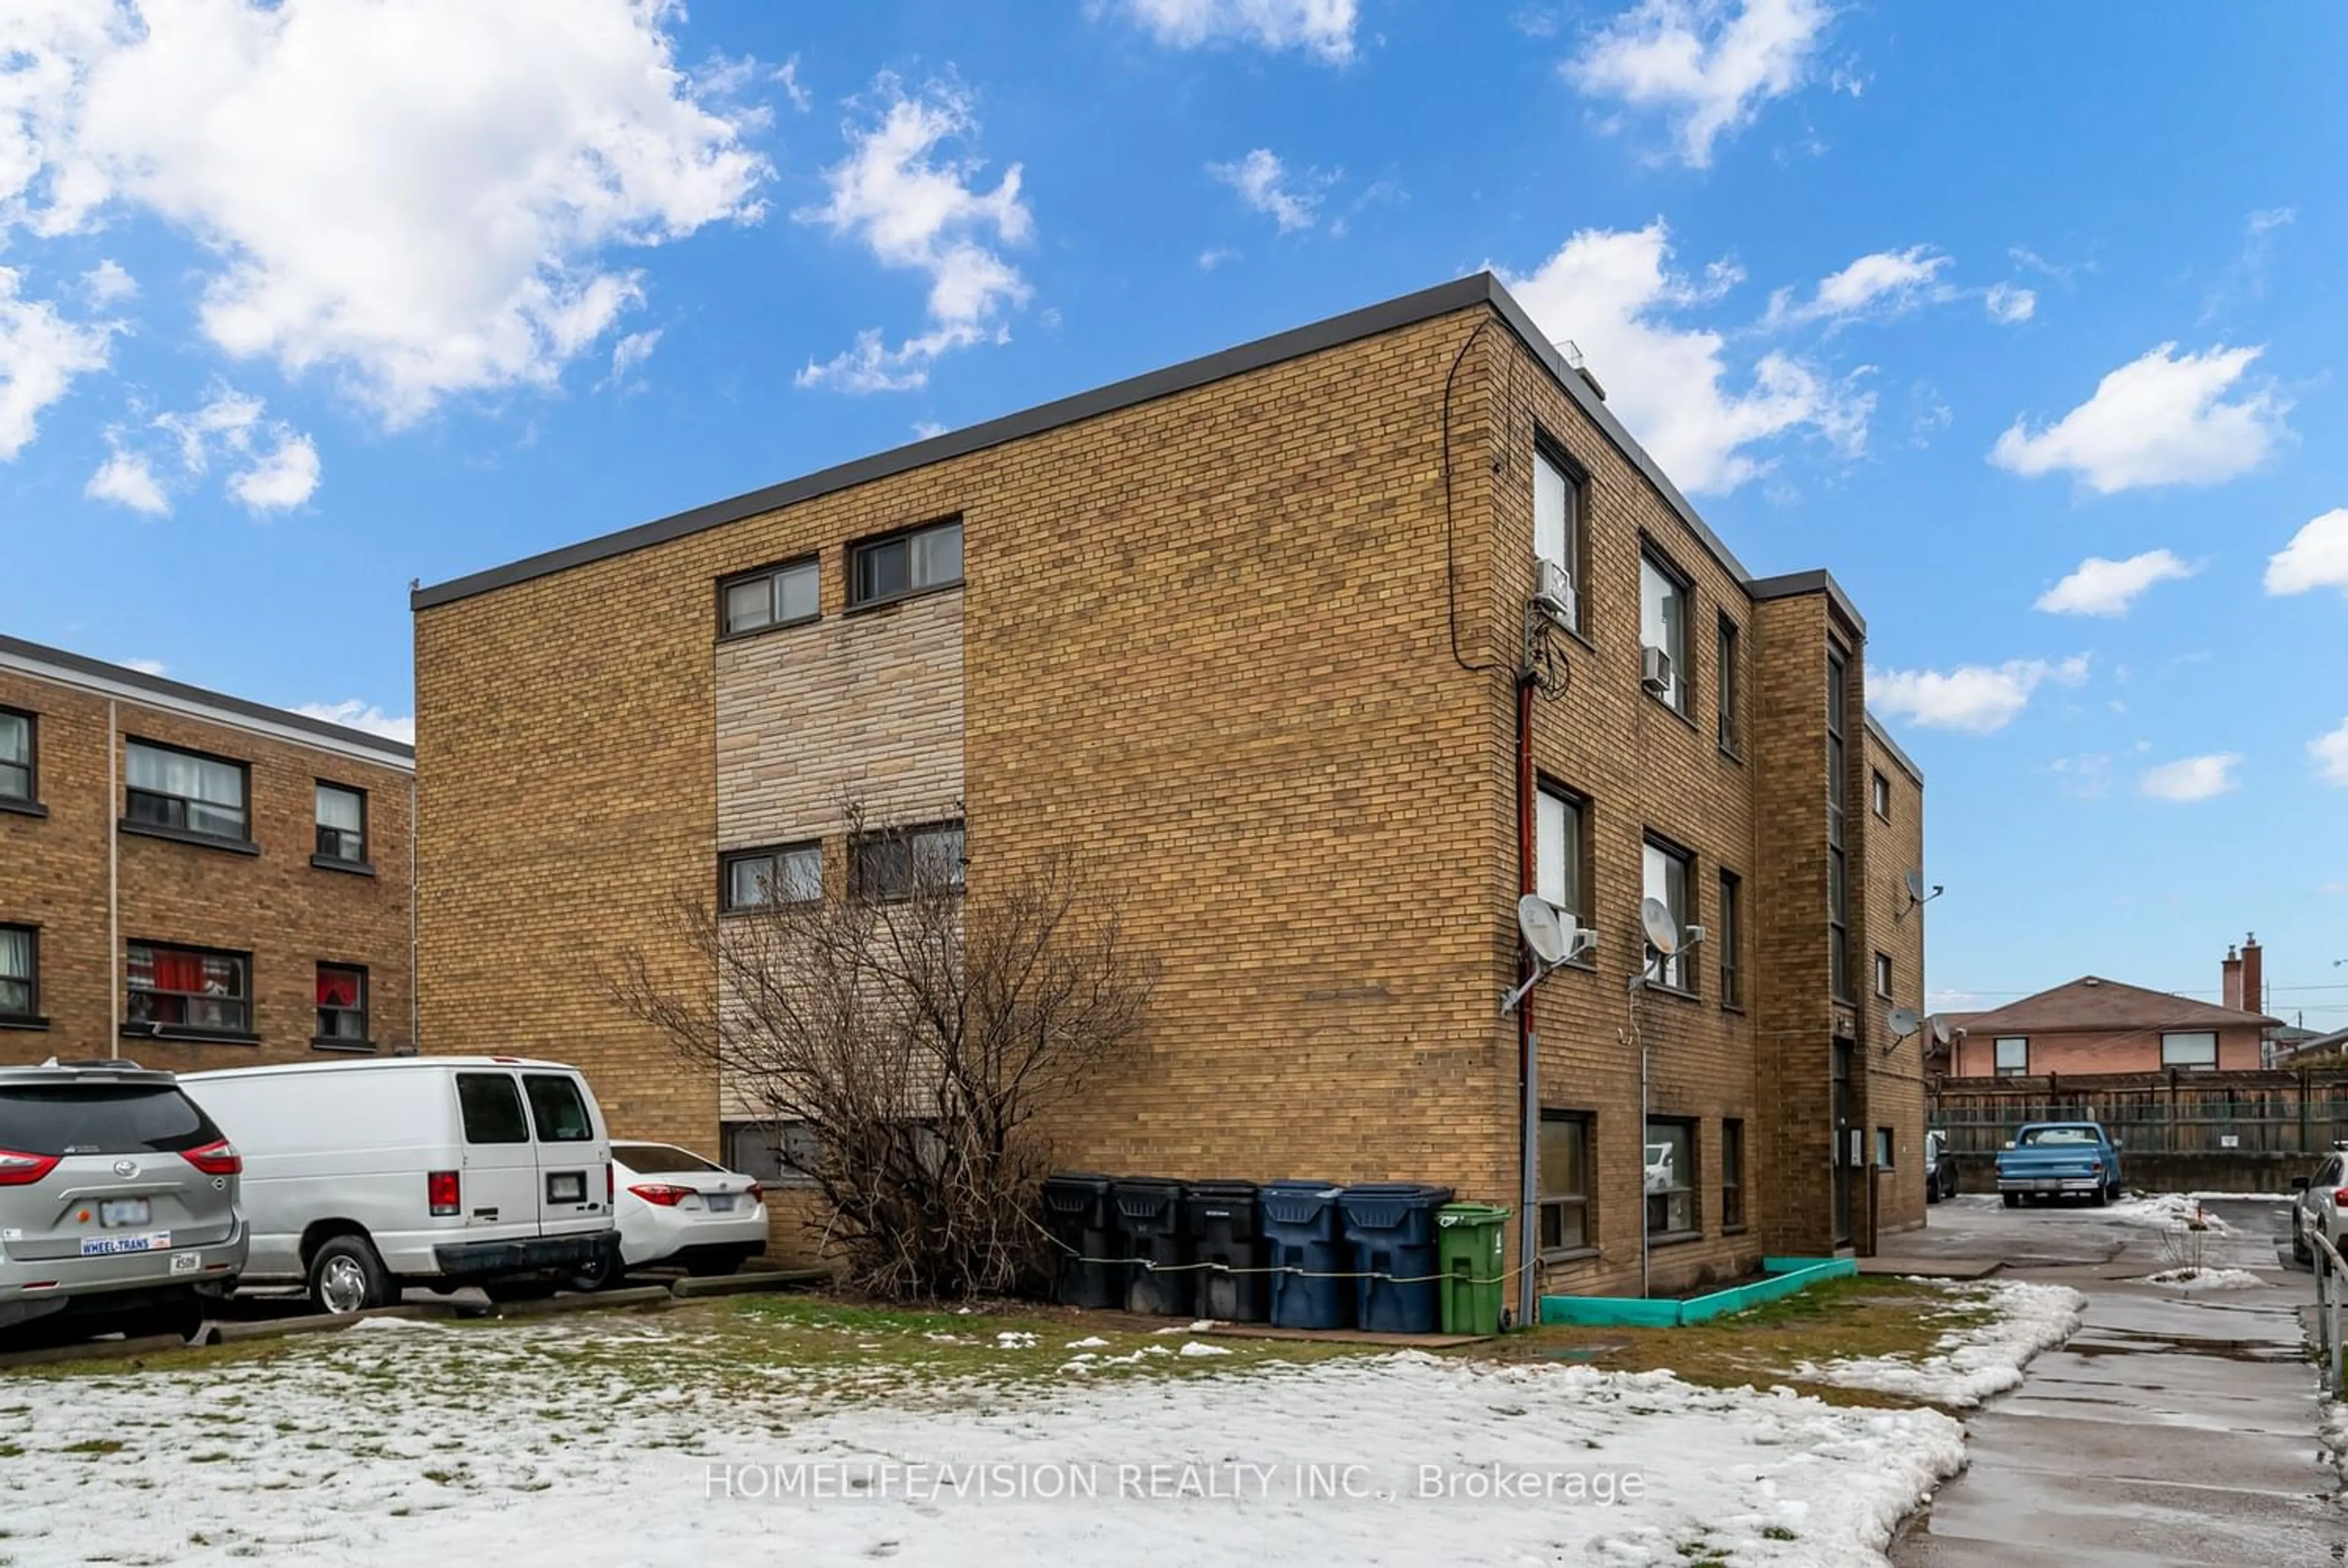 A pic from exterior of the house or condo for 2639 Keele St, Toronto Ontario M6L 2P2